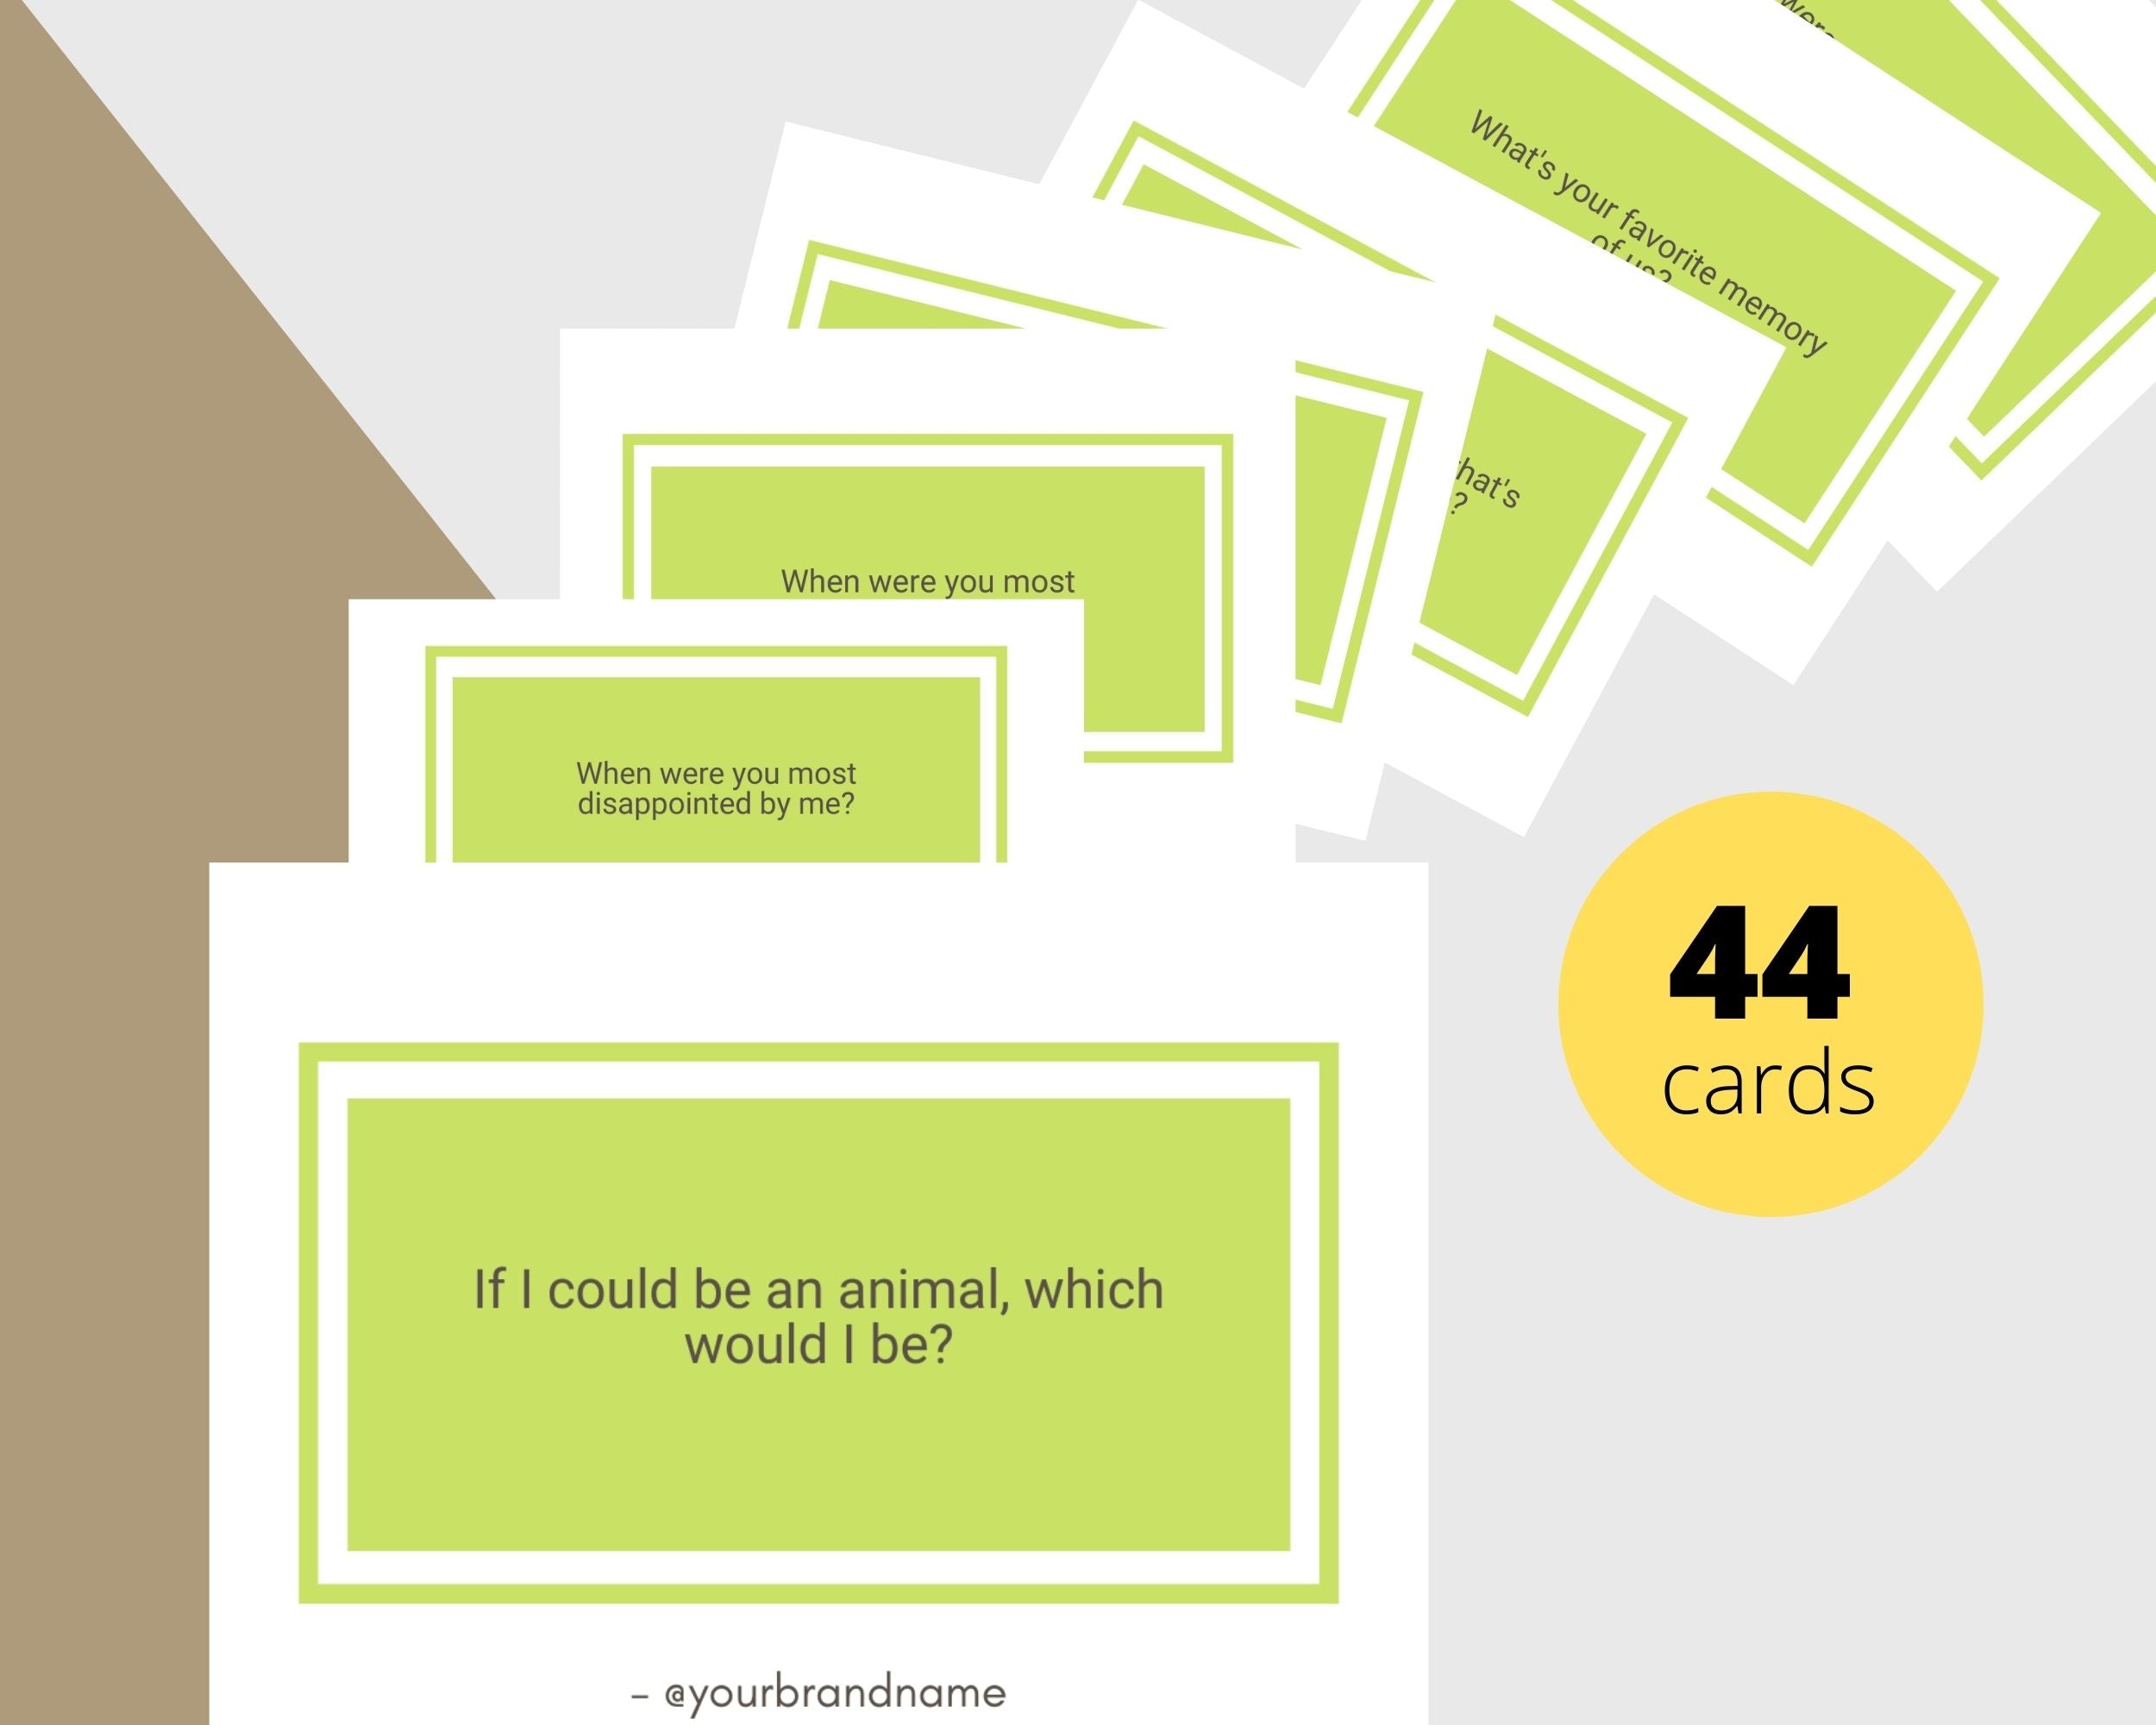 44 Do You Know Me Cards | Canva Inspirational Cards | Commercial Use